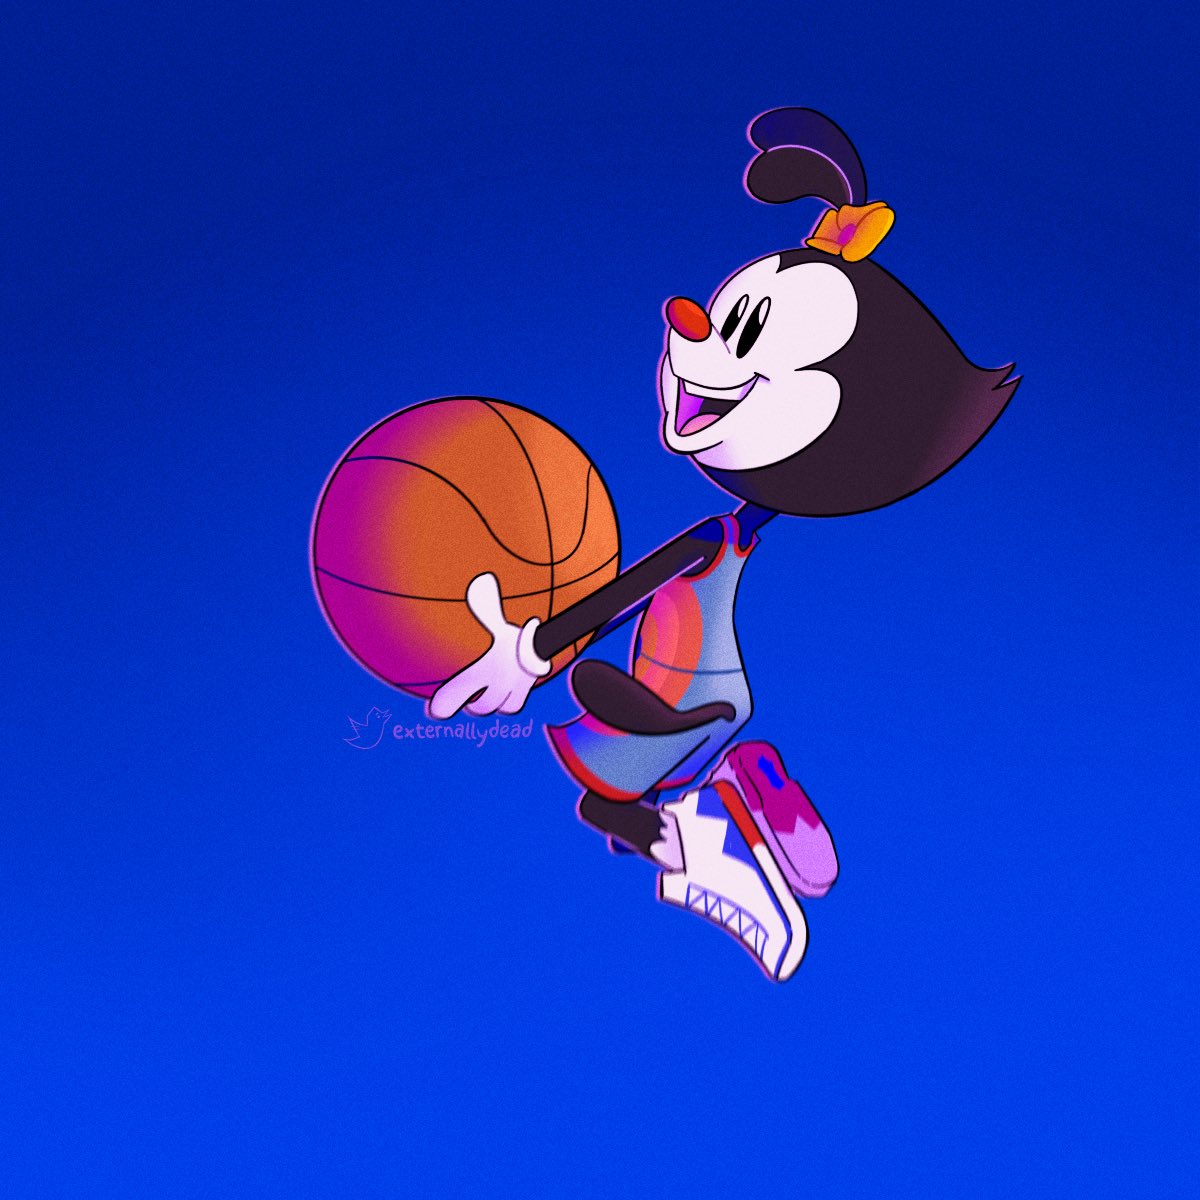 WARNERS IN SPACE JAM 2!!! #animaniacs.